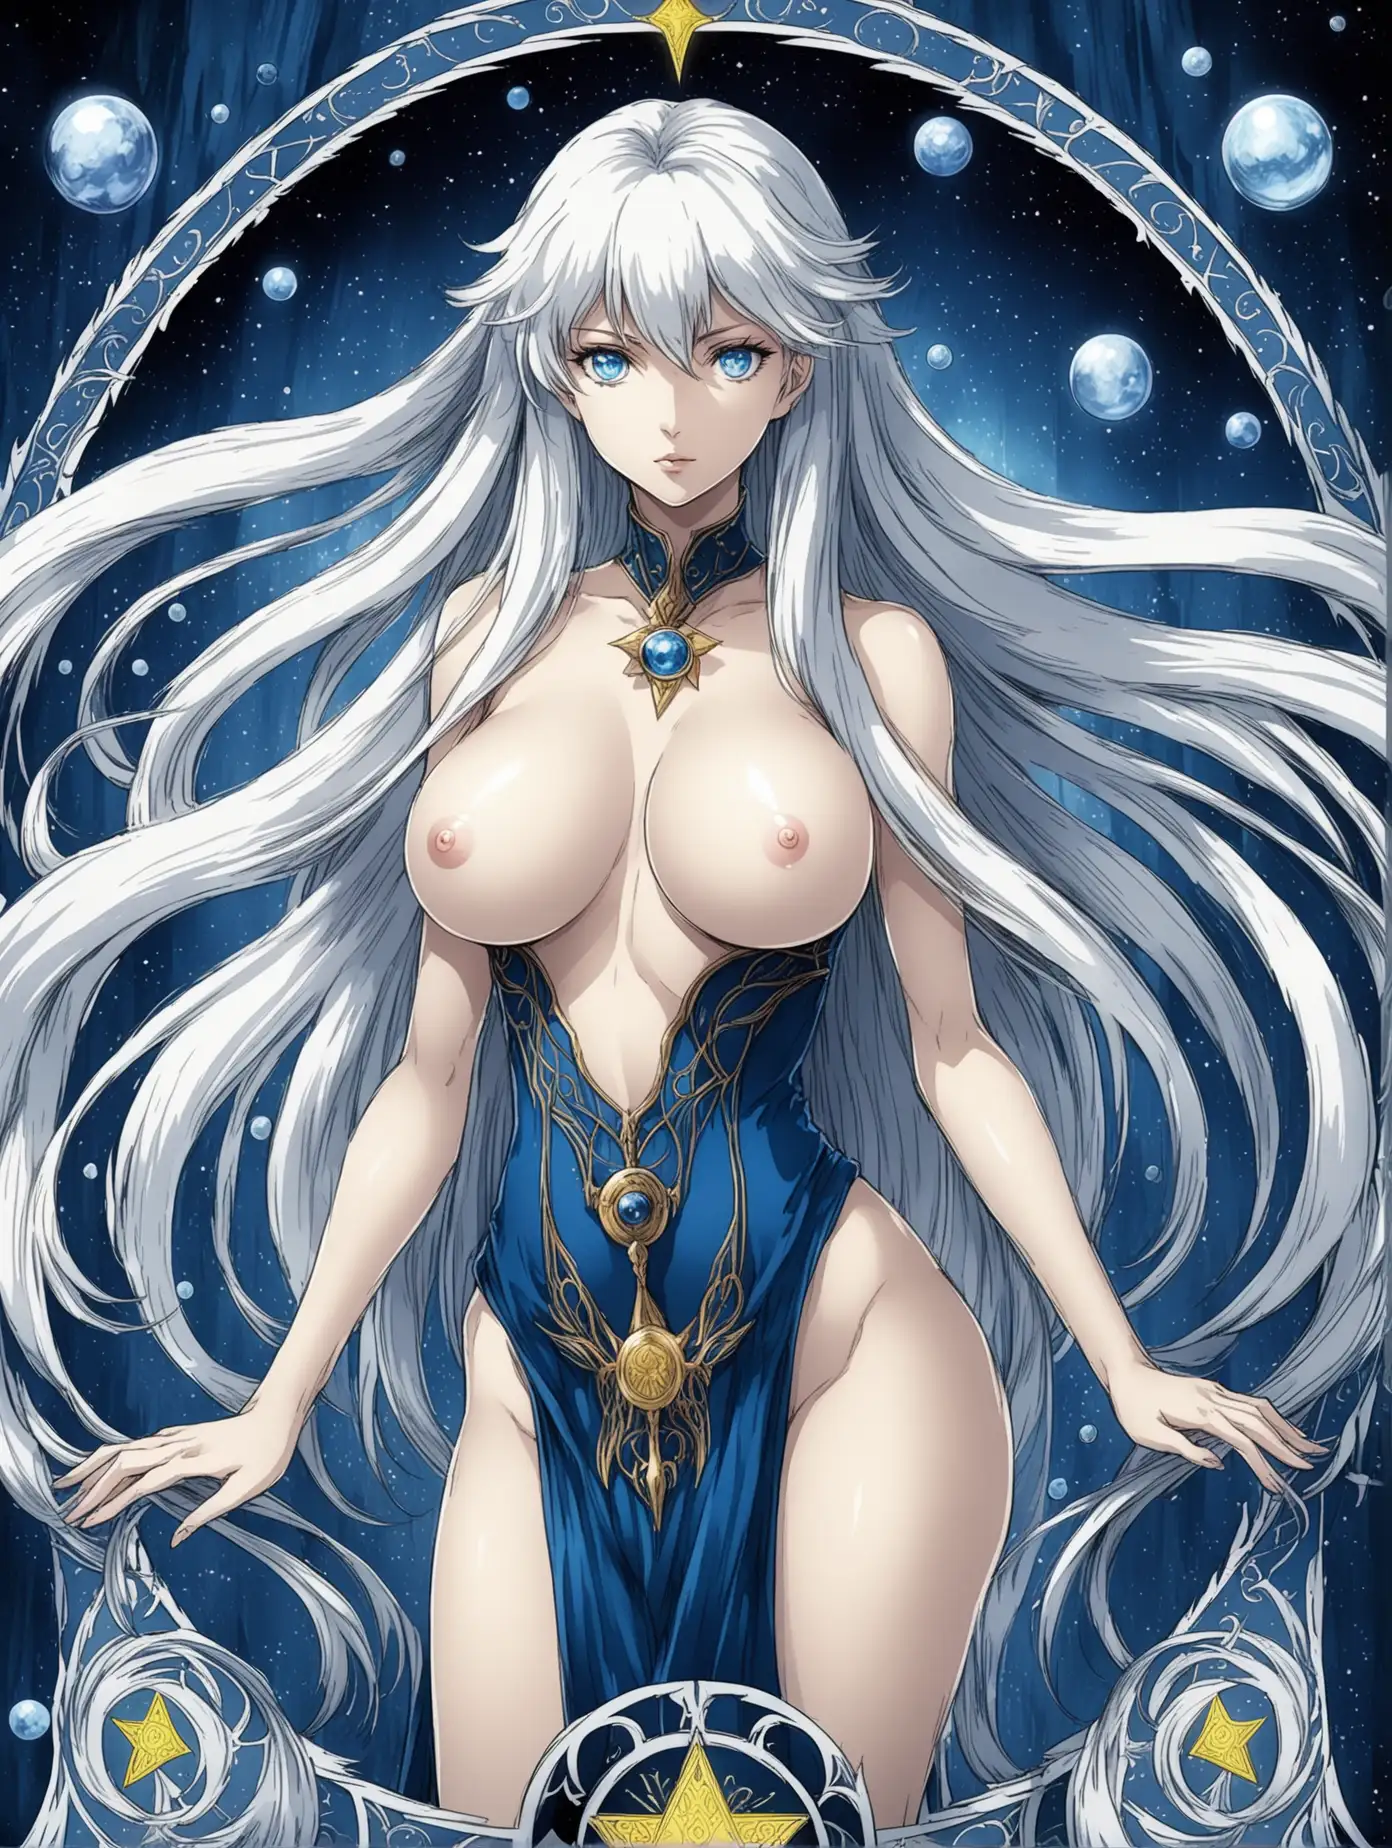 Dark-Fantasy-Anime-Illustration-Enigmatic-WhiteHaired-Woman-with-Blue-Eyes